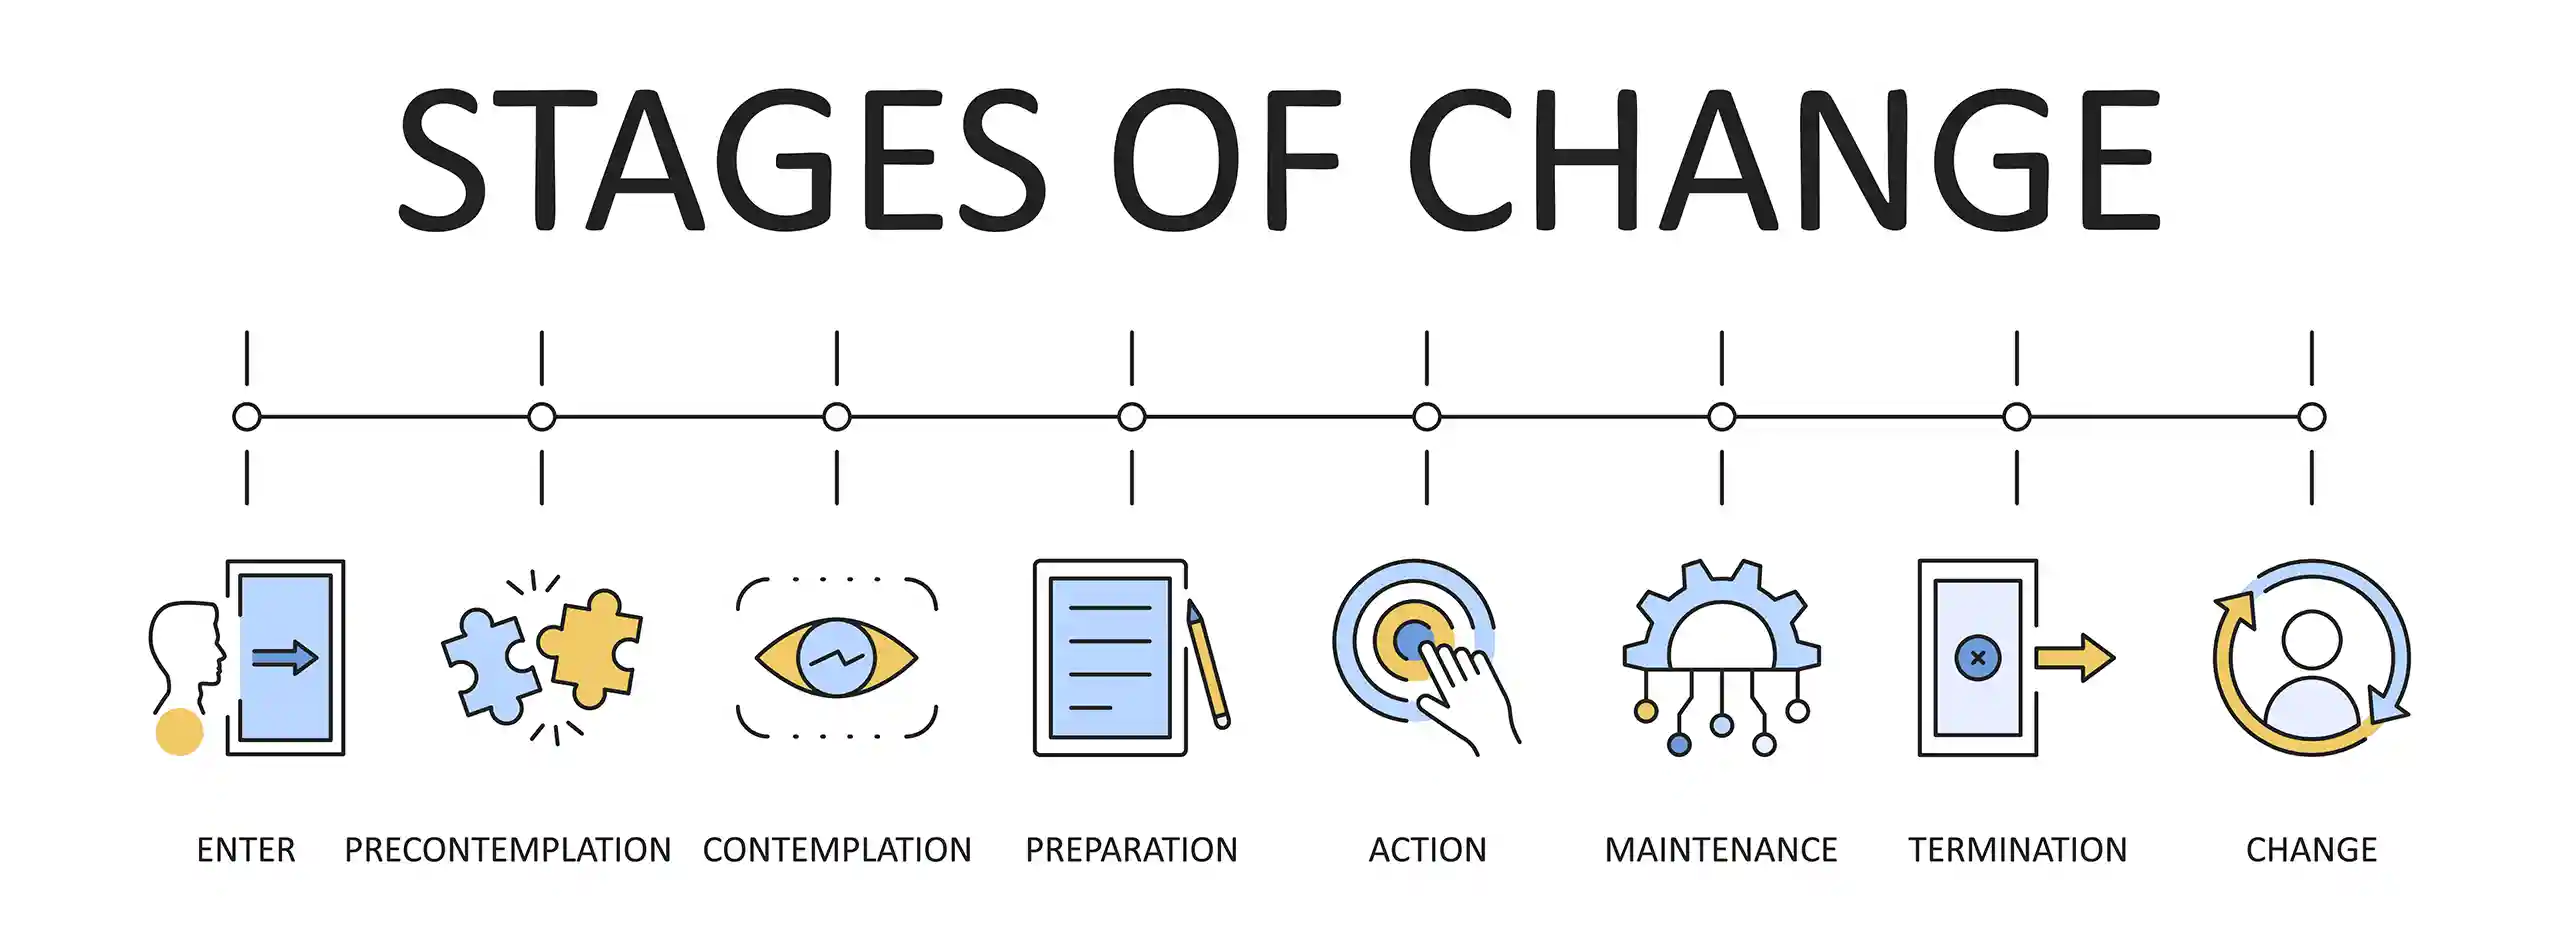 The Stages of Change model in seeking help